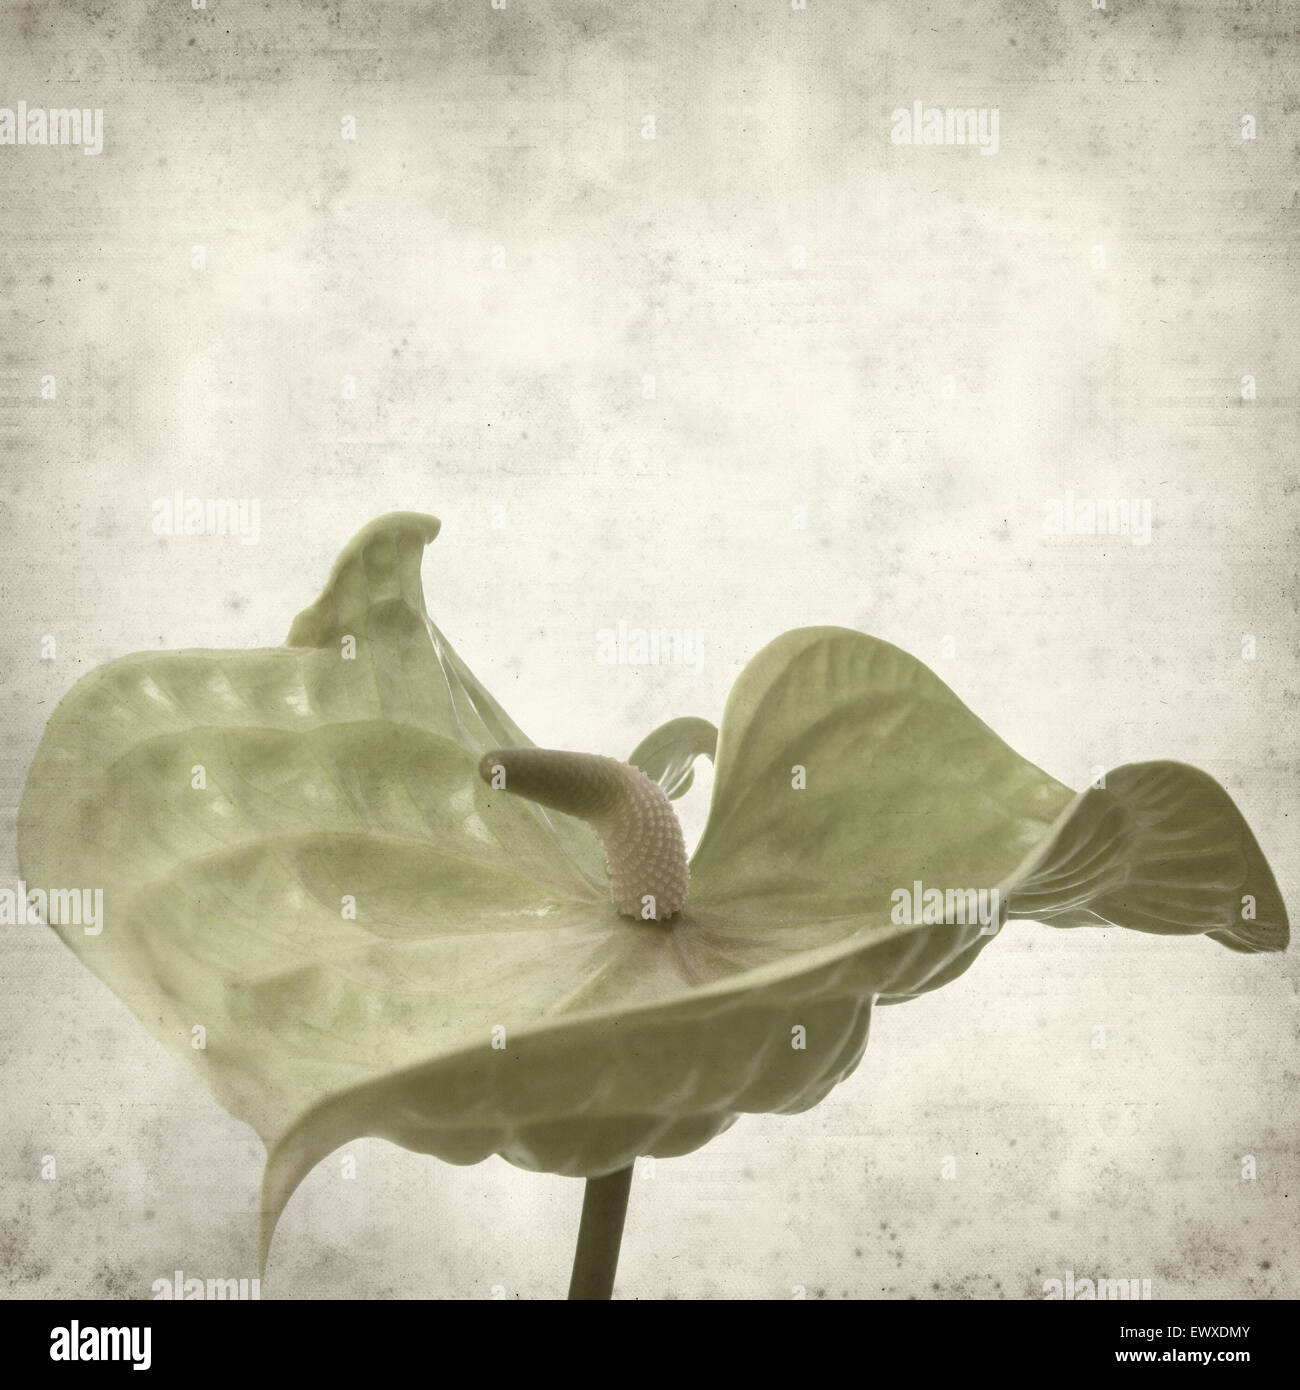 textured old paper background with green Anthurium flower Stock Photo